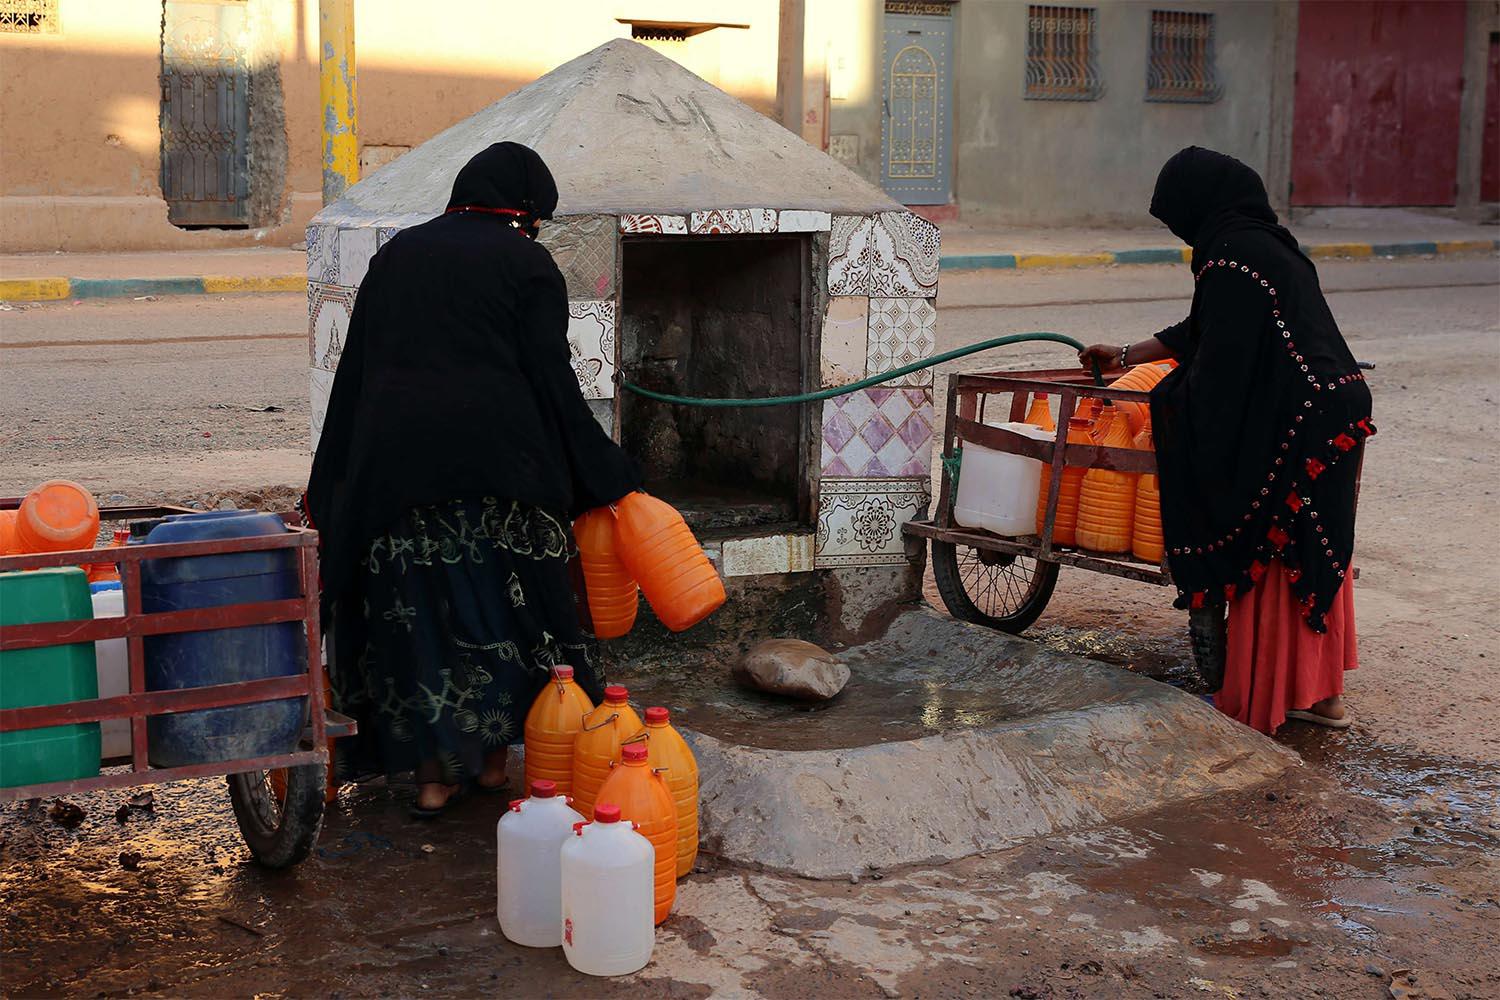 Moroccan women filling up containers with water from a hose in Zagora